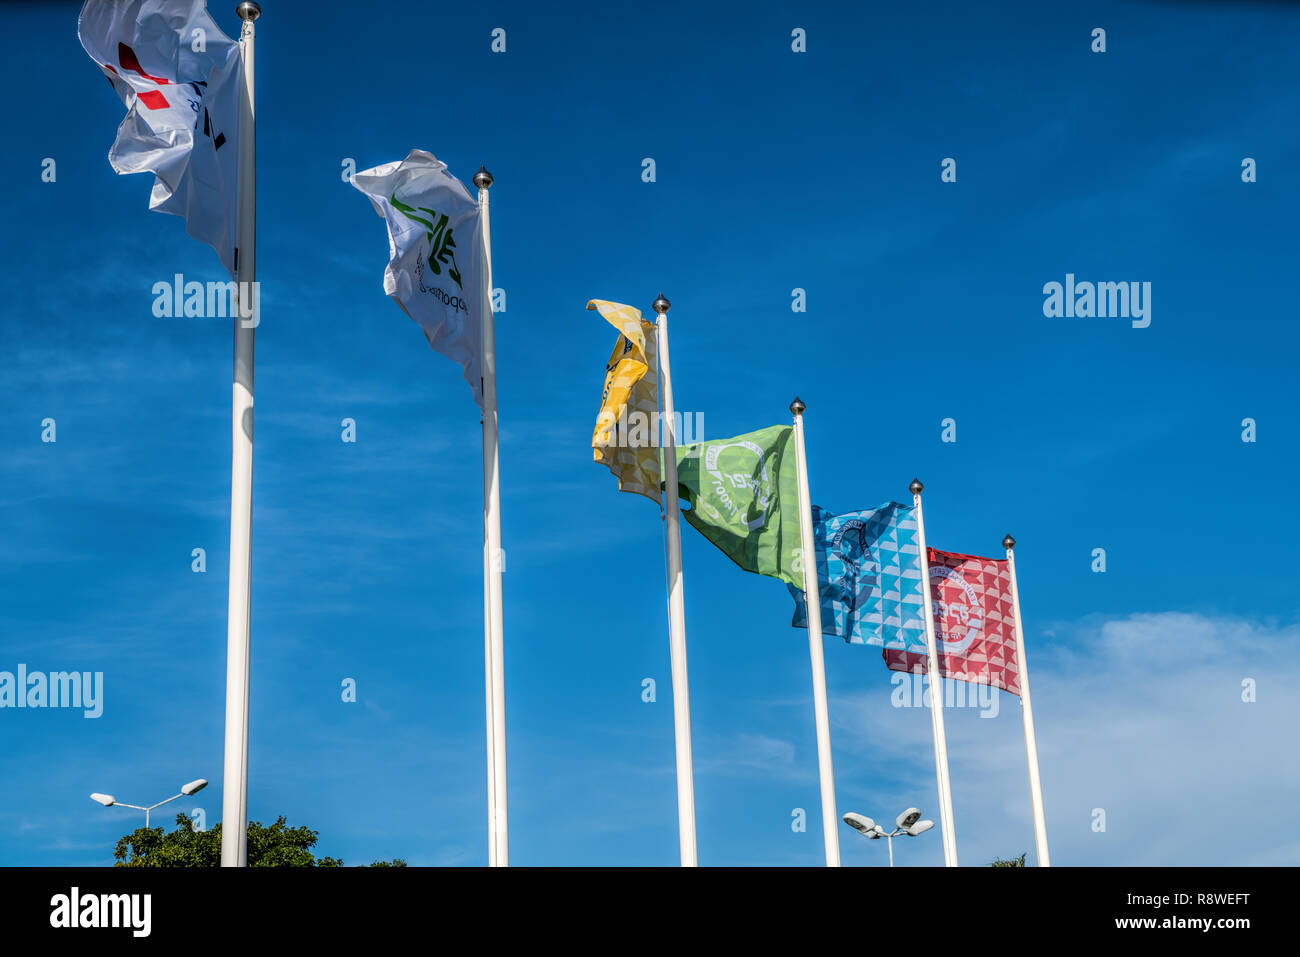 Flags of different countries on a background of blue sky Stock Photo